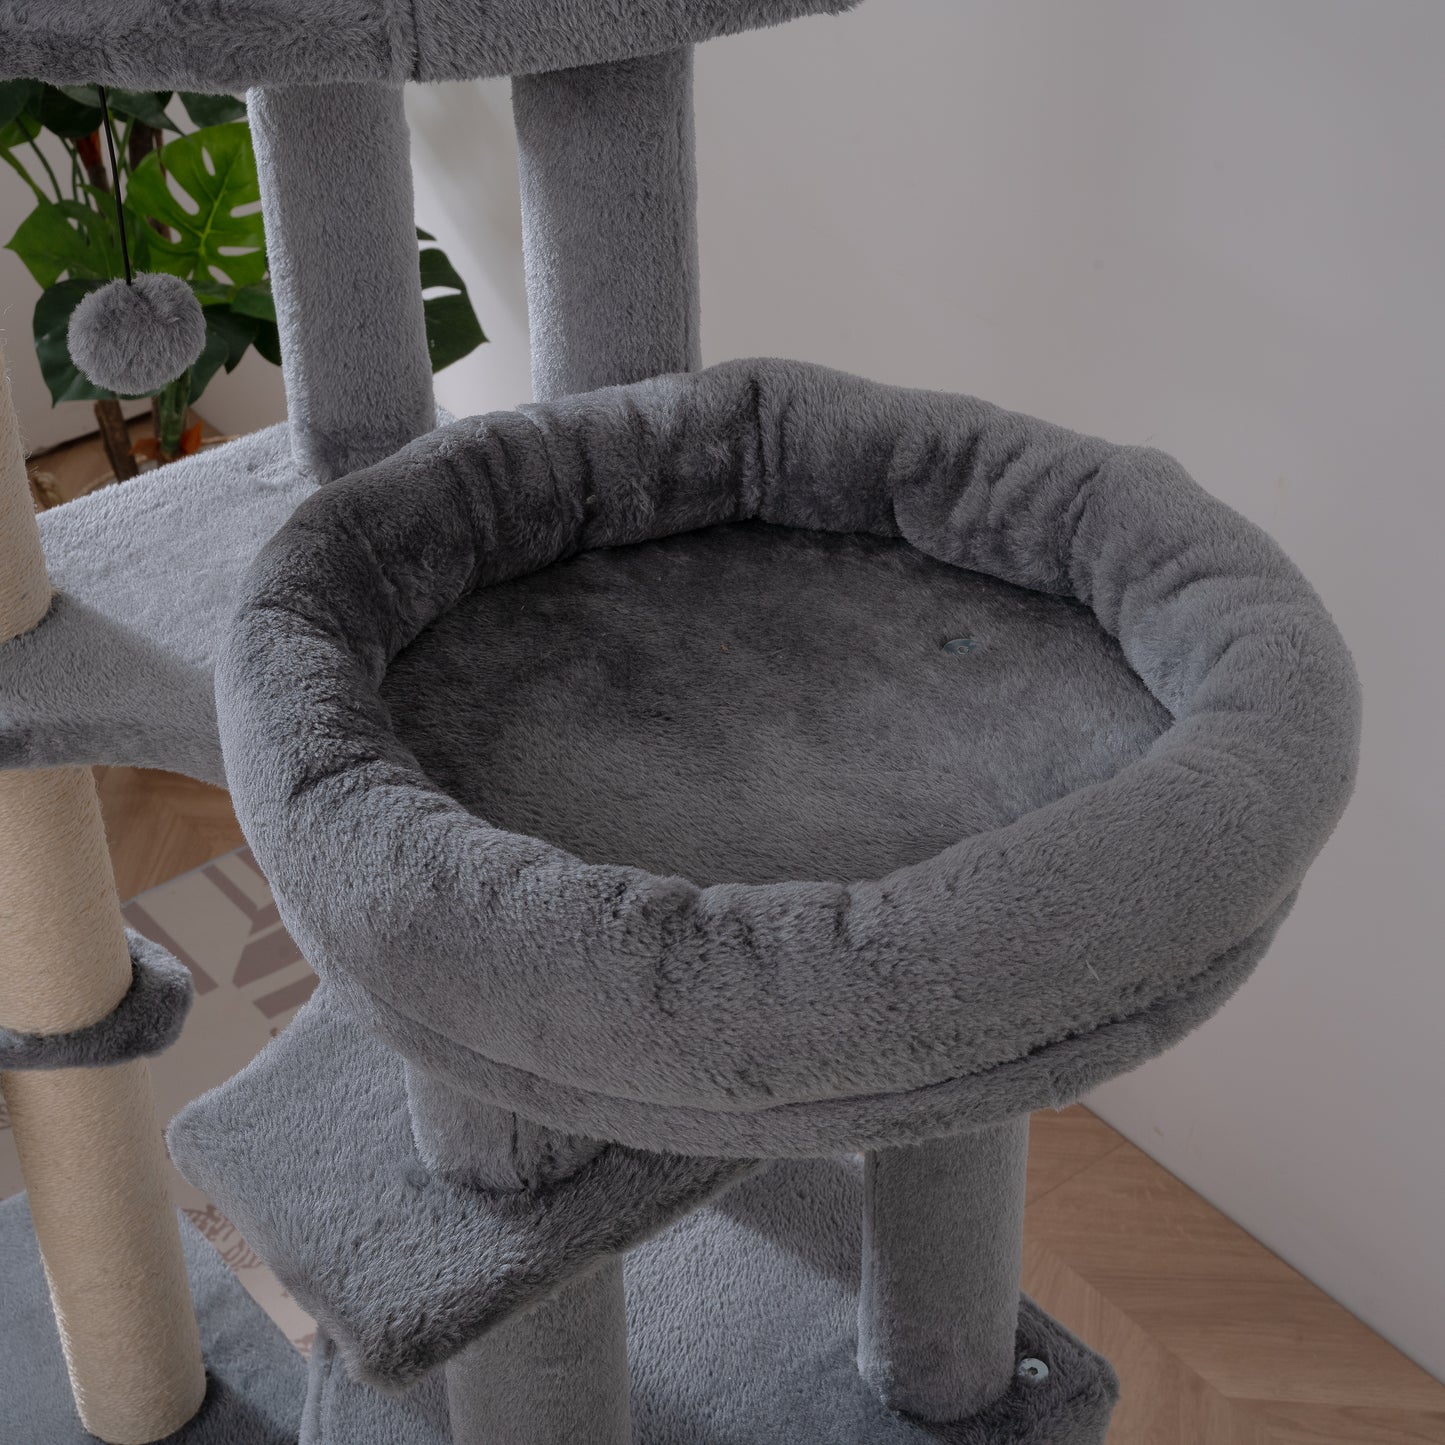 Cat Tree, 105-Inch Cat Tower for Indoor Cats, Plush Multi-Level Cat Condo with 3 Perches, 2 Caves, Cozy Basket and Scratching Board, GRAY COLOR